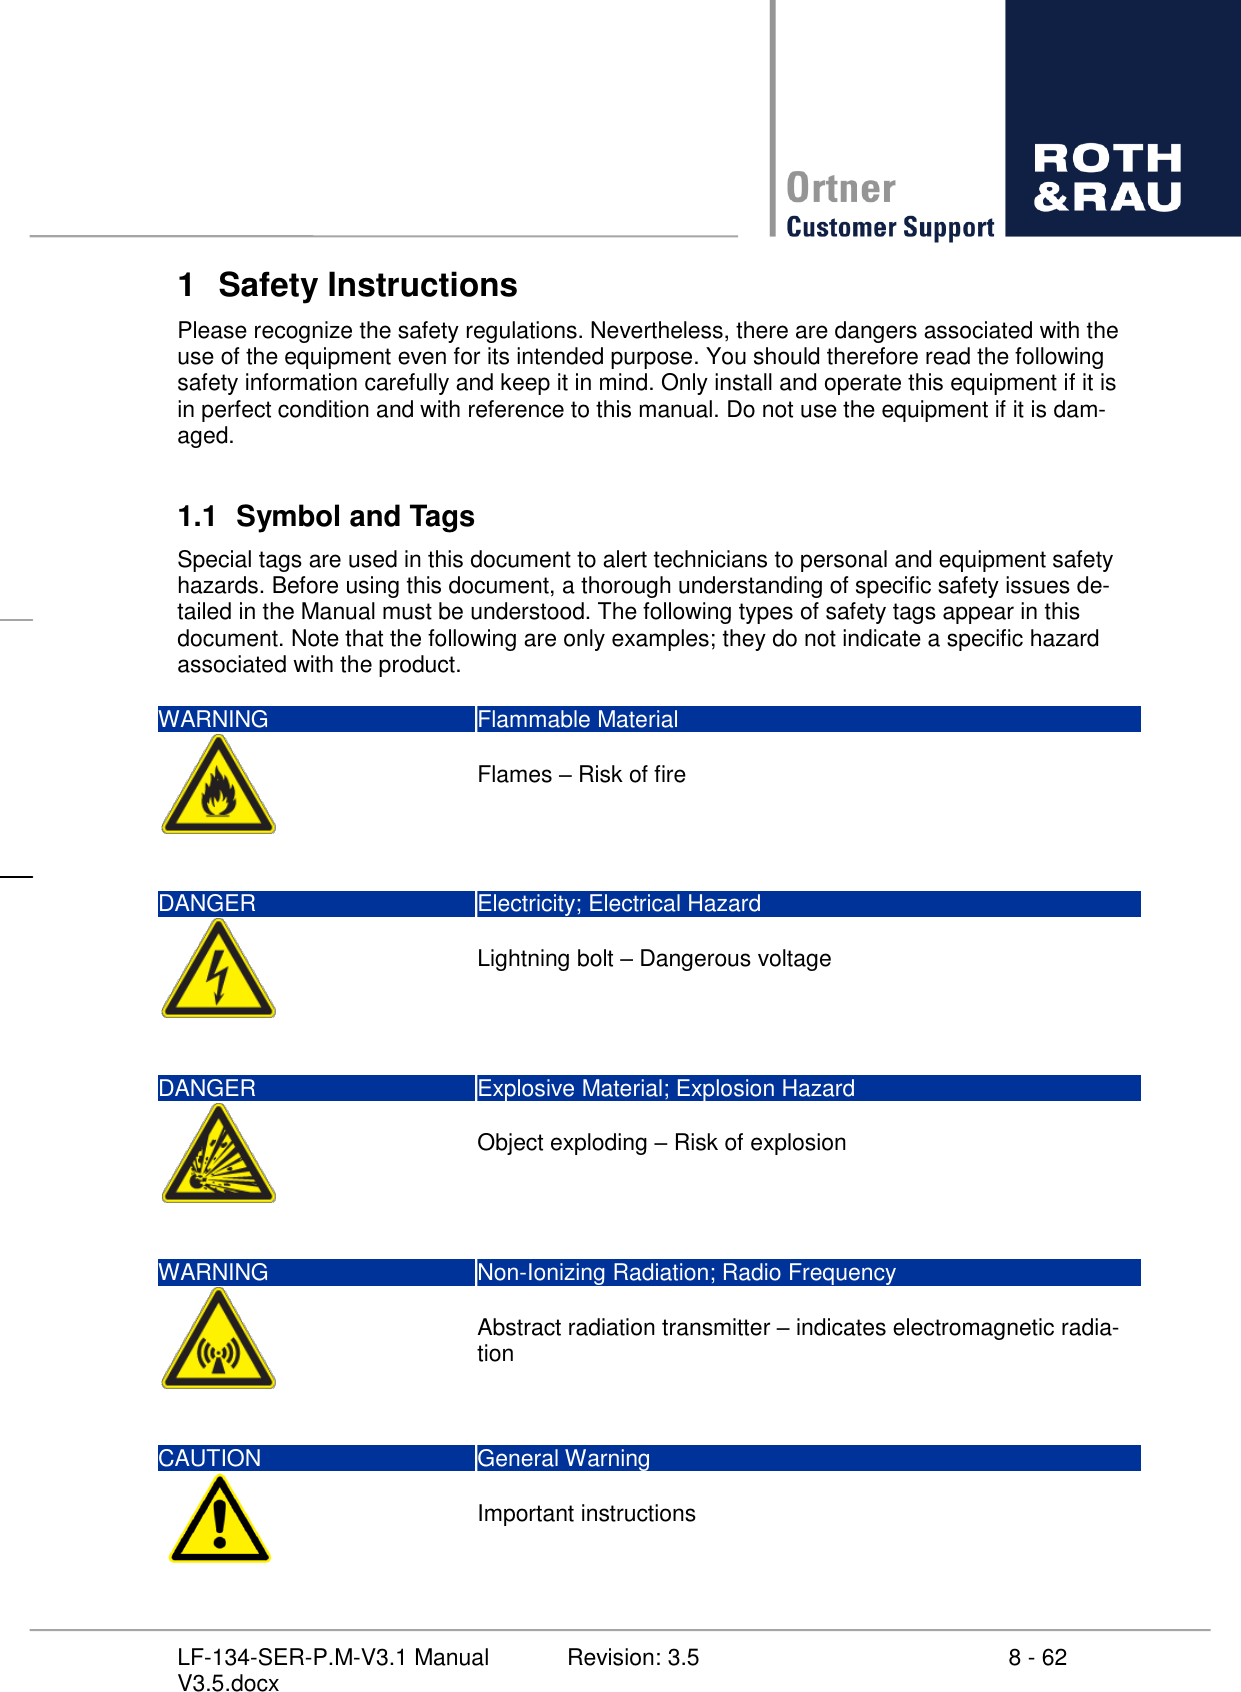     8 - 62 Revision: 3.5 LF-134-SER-P.M-V3.1 Manual V3.5.docx 1  Safety Instructions Please recognize the safety regulations. Nevertheless, there are dangers associated with the use of the equipment even for its intended purpose. You should therefore read the following safety information carefully and keep it in mind. Only install and operate this equipment if it is in perfect condition and with reference to this manual. Do not use the equipment if it is dam-aged.  1.1  Symbol and Tags Special tags are used in this document to alert technicians to personal and equipment safety hazards. Before using this document, a thorough understanding of specific safety issues de-tailed in the Manual must be understood. The following types of safety tags appear in this document. Note that the following are only examples; they do not indicate a specific hazard associated with the product.  WARNING Flammable Material    Flames  Risk of fire  DANGER Electricity; Electrical Hazard    Lightning bolt  Dangerous voltage  DANGER Explosive Material; Explosion Hazard    Object exploding  Risk of explosion  WARNING Non-Ionizing Radiation; Radio Frequency    Abstract radiation transmitter  indicates electromagnetic radia-tion   CAUTION General Warning    Important instructions 